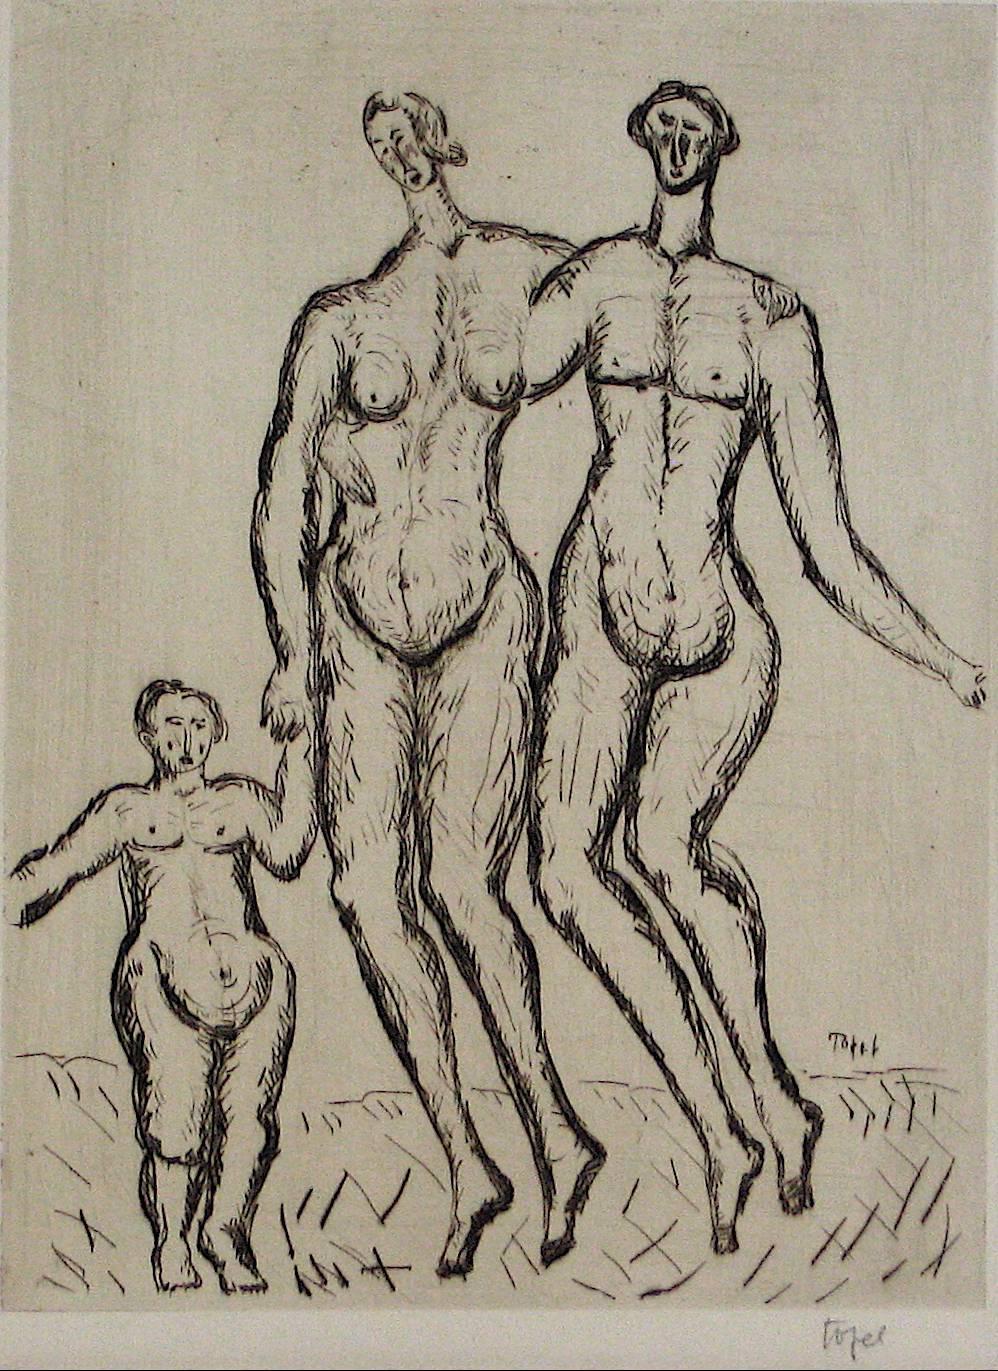 Jennings Tofel Figurative Print - Expressionist Figures with Child, Etching on Paper, Early 20th Century